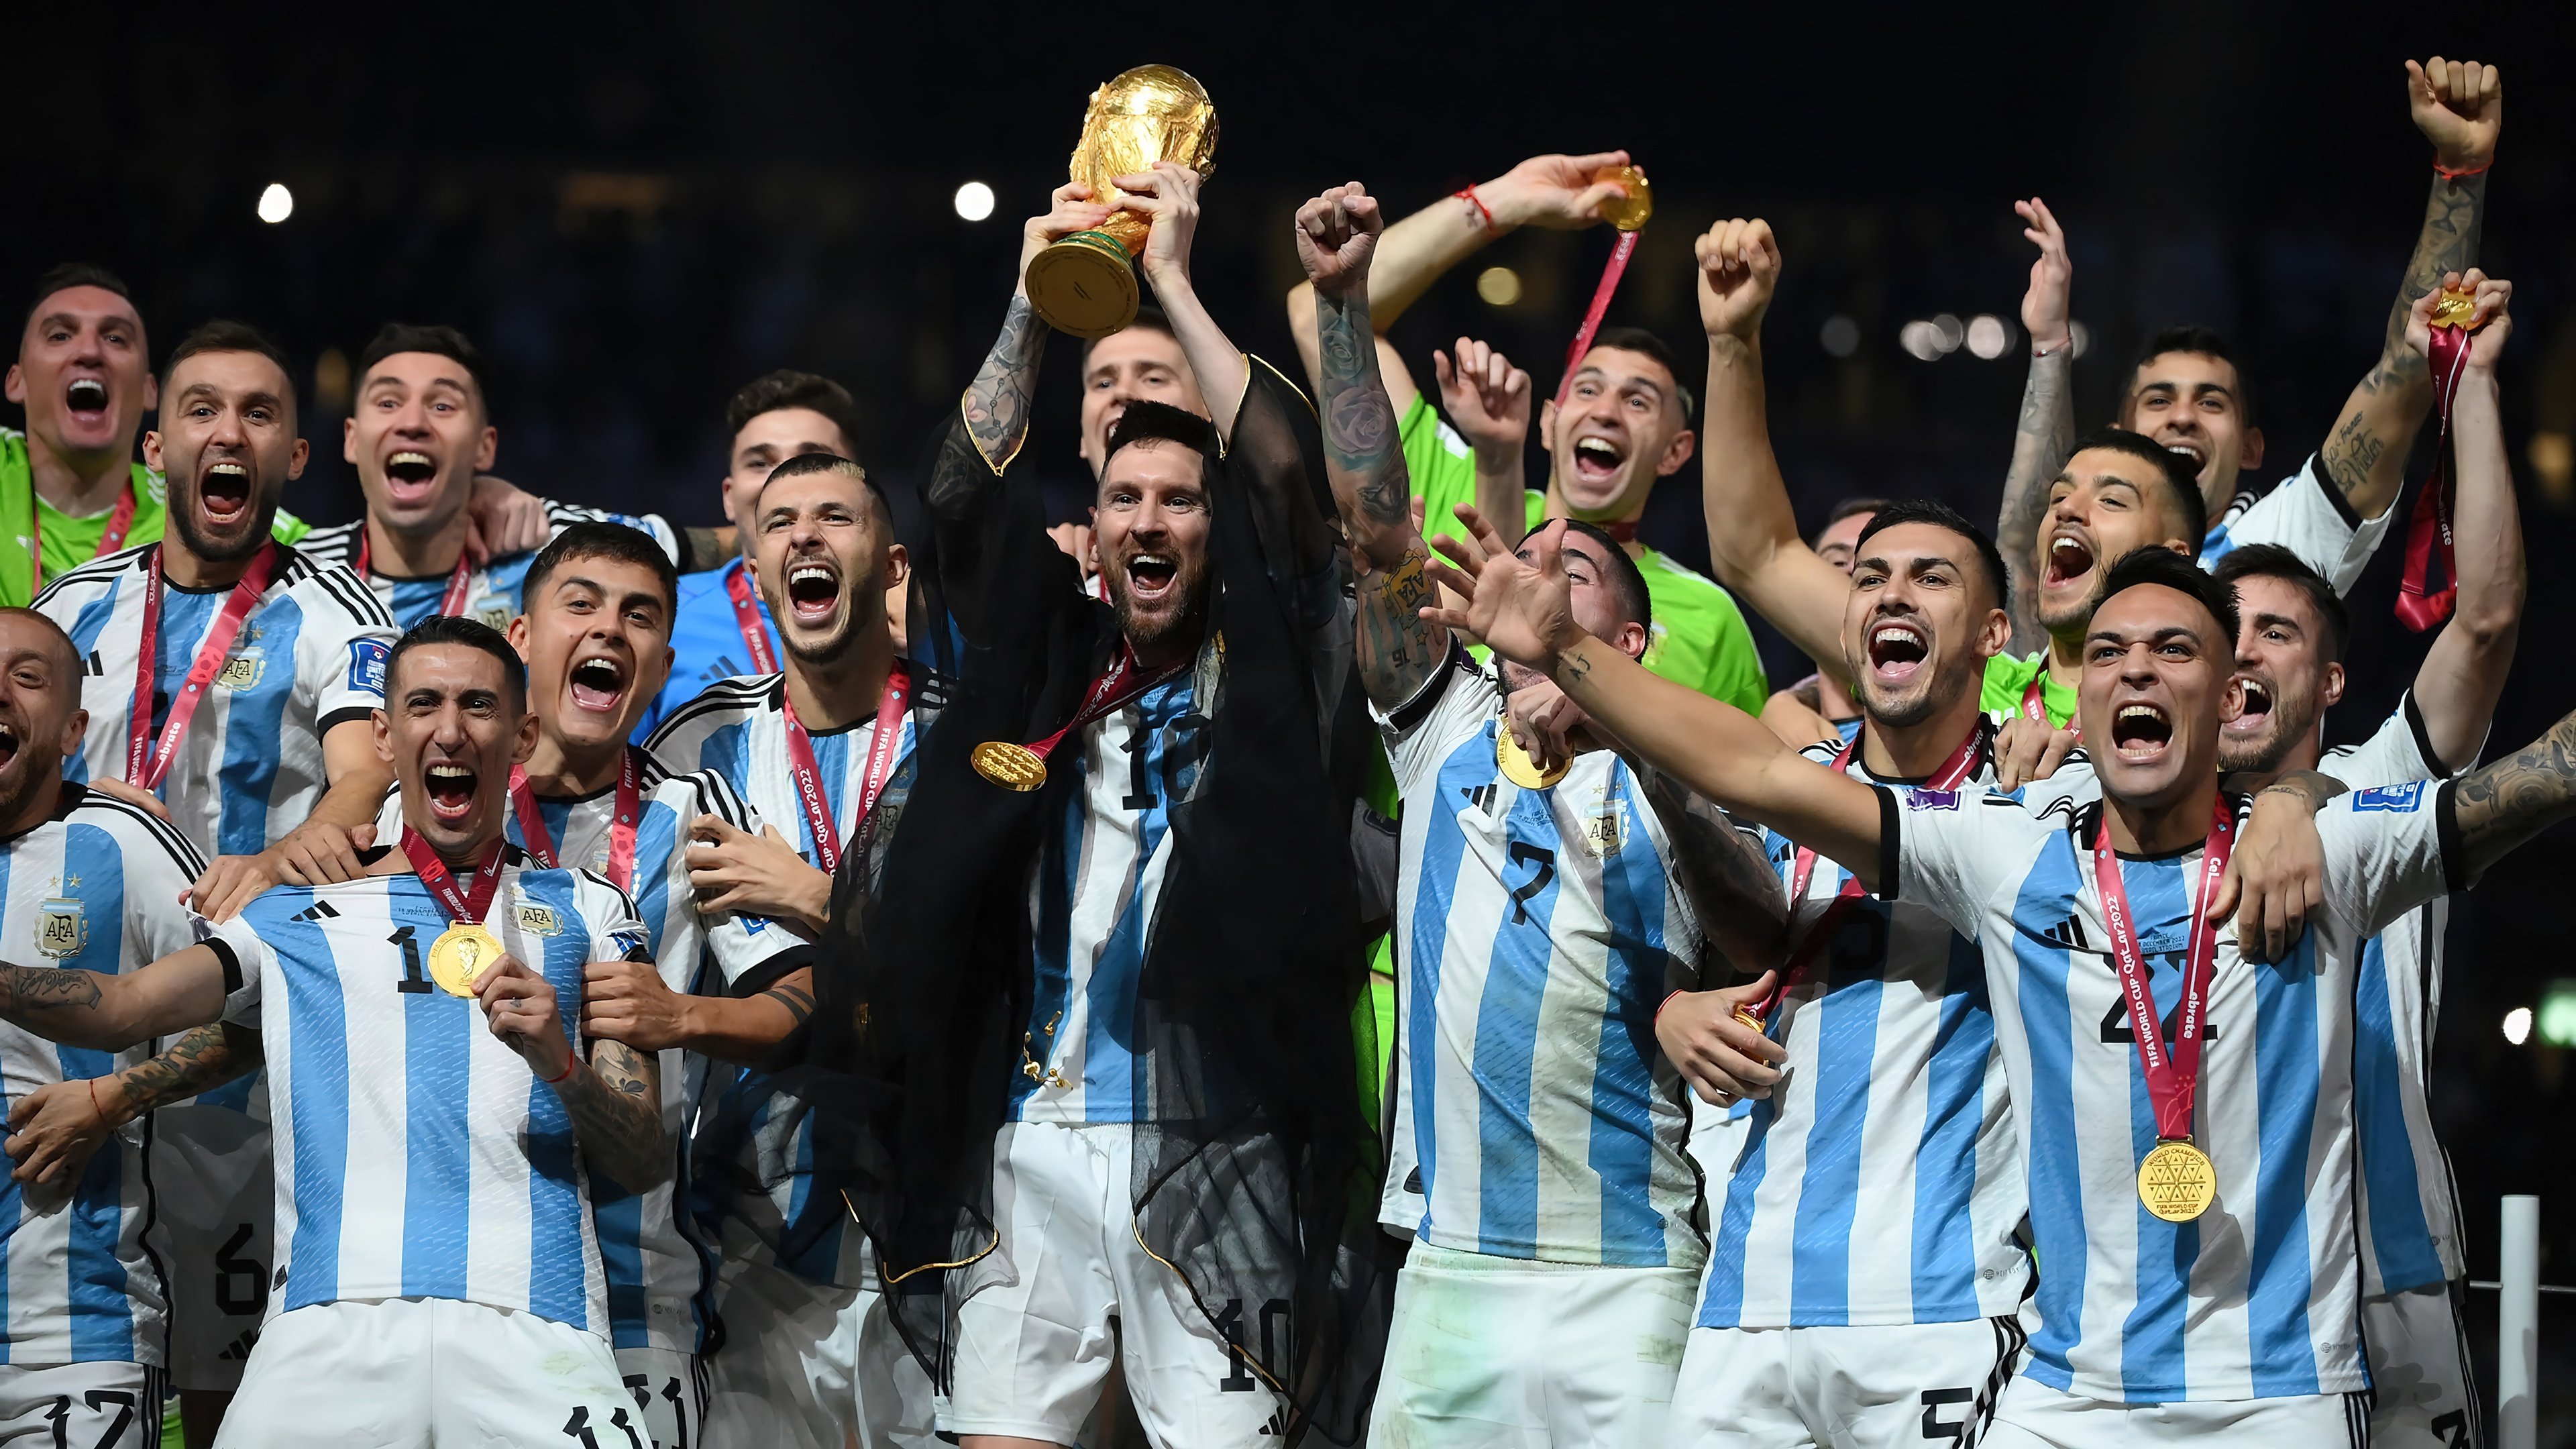 Argentina Team with tophy FIFA World Cup Wallpaper 4k Ultra HD ID:11268